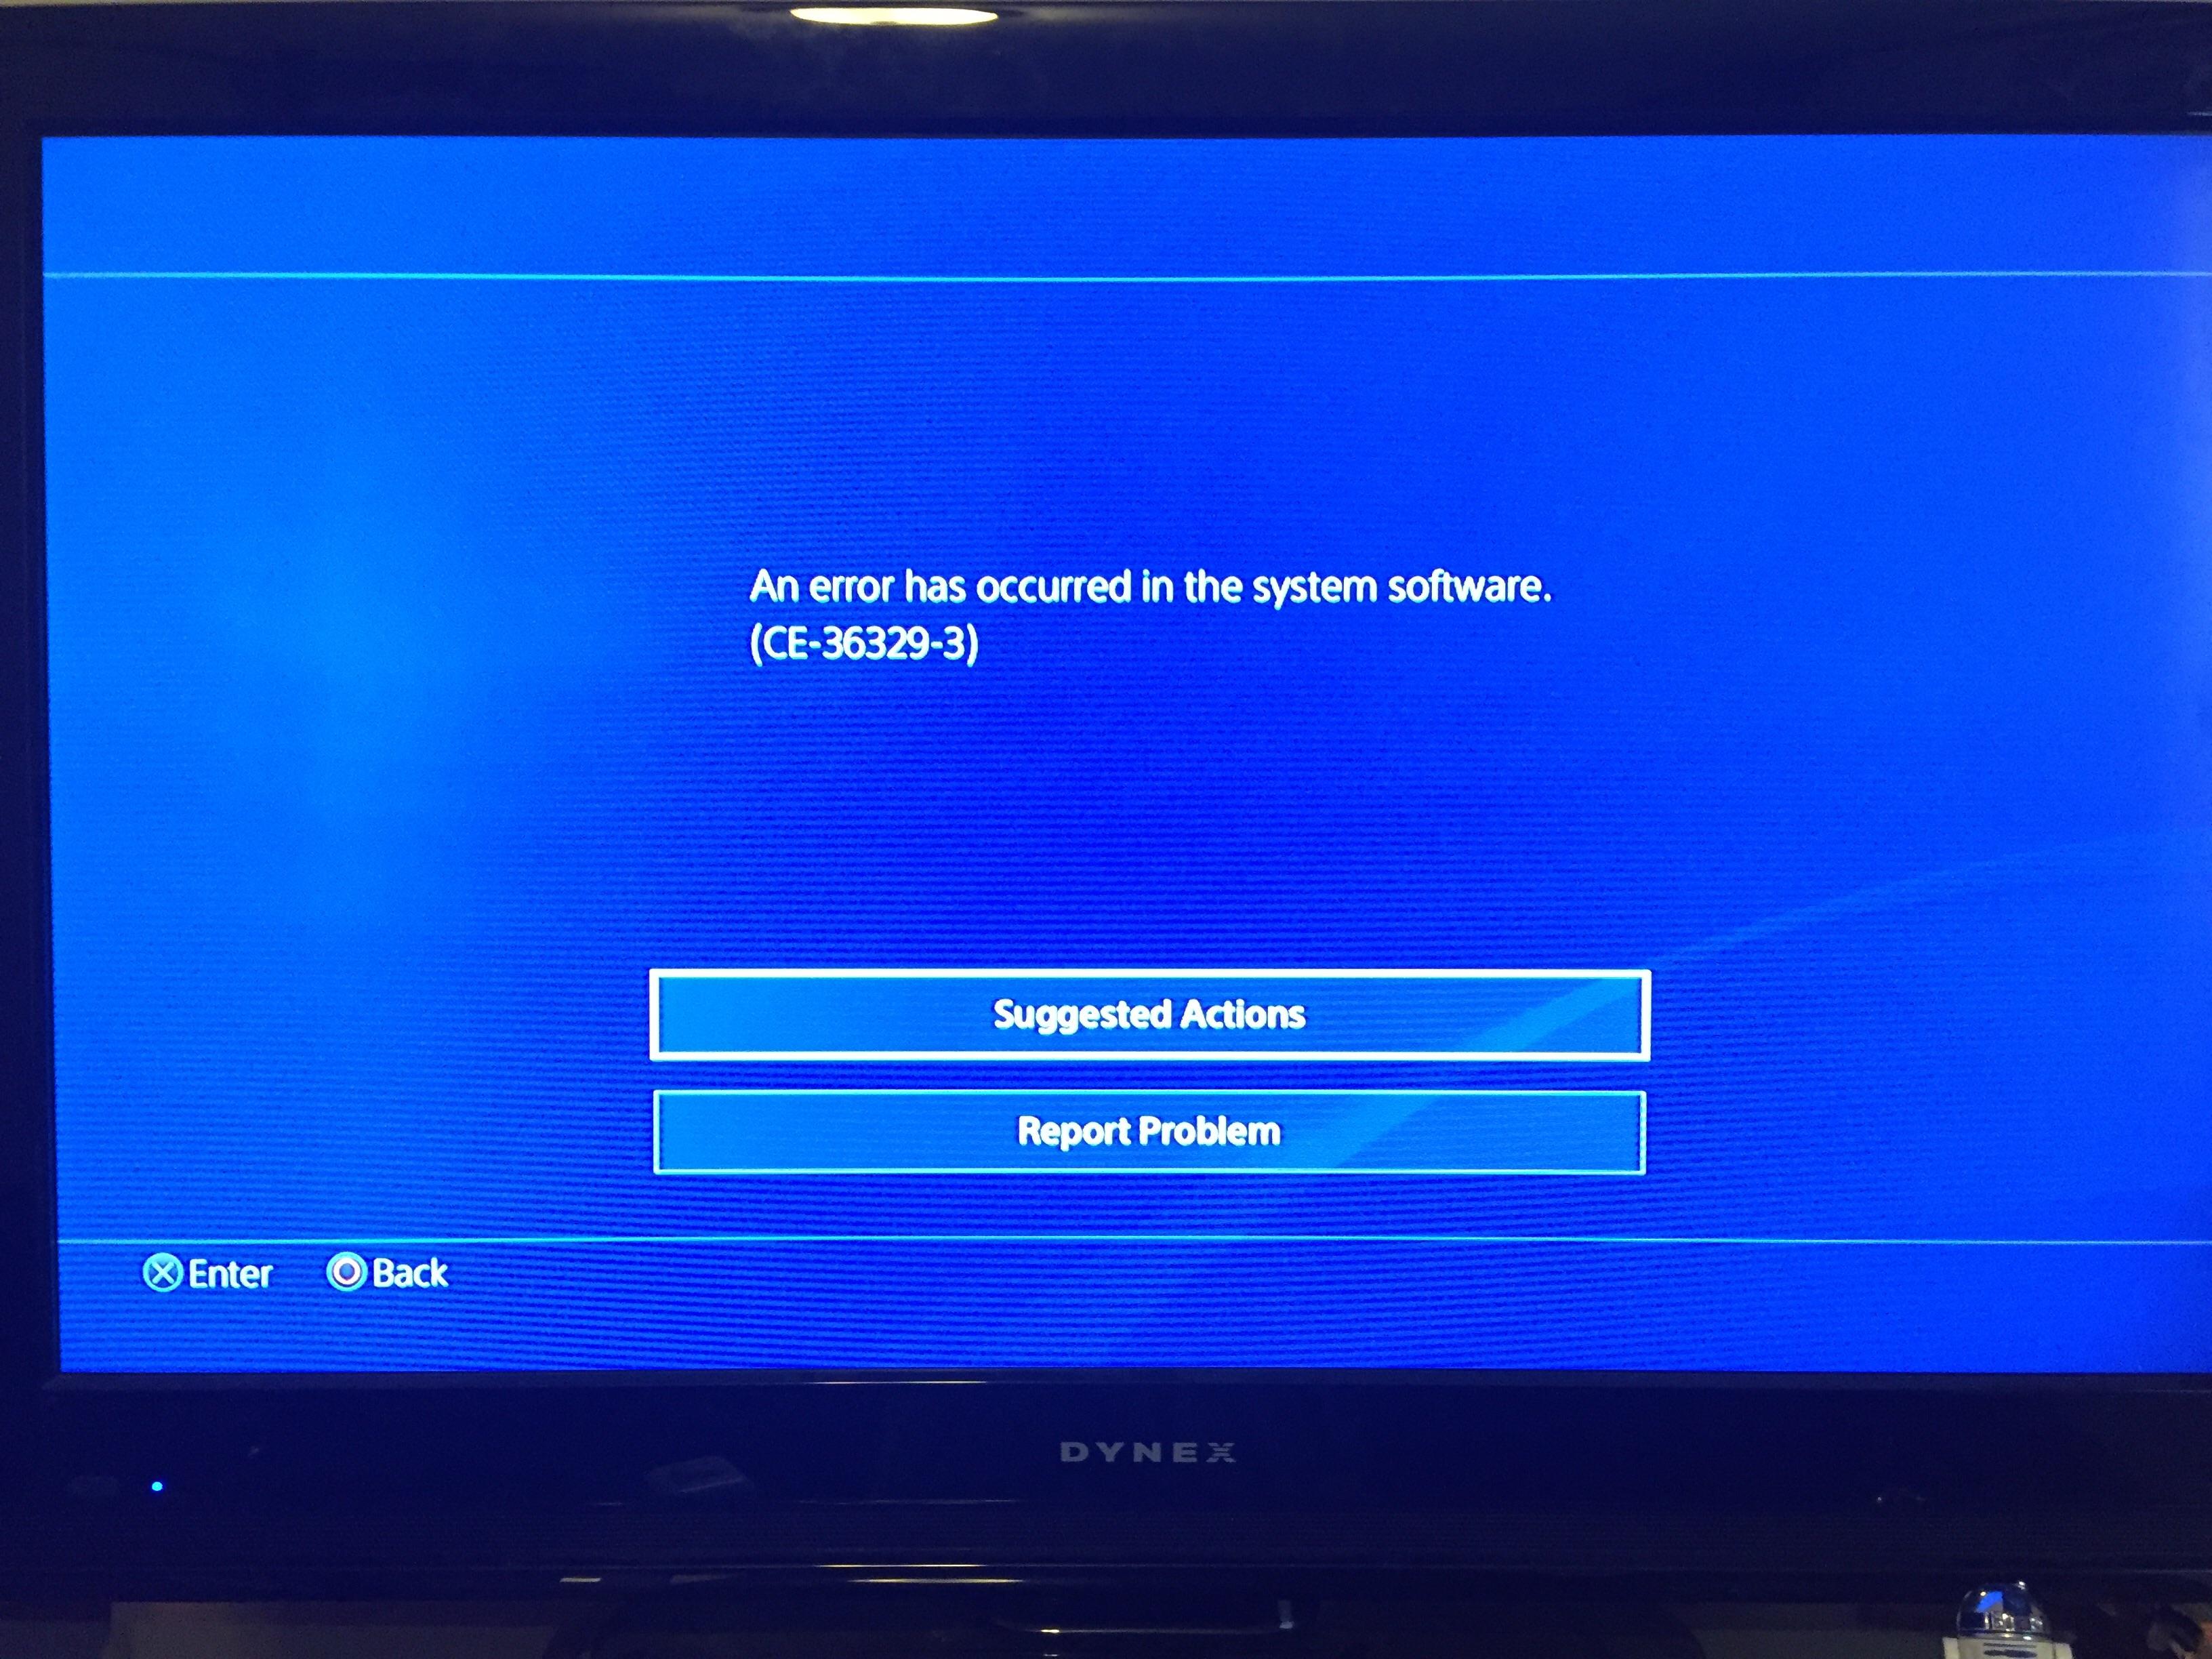 PS4 Error CE-36329-3 causes PS4 to freeze